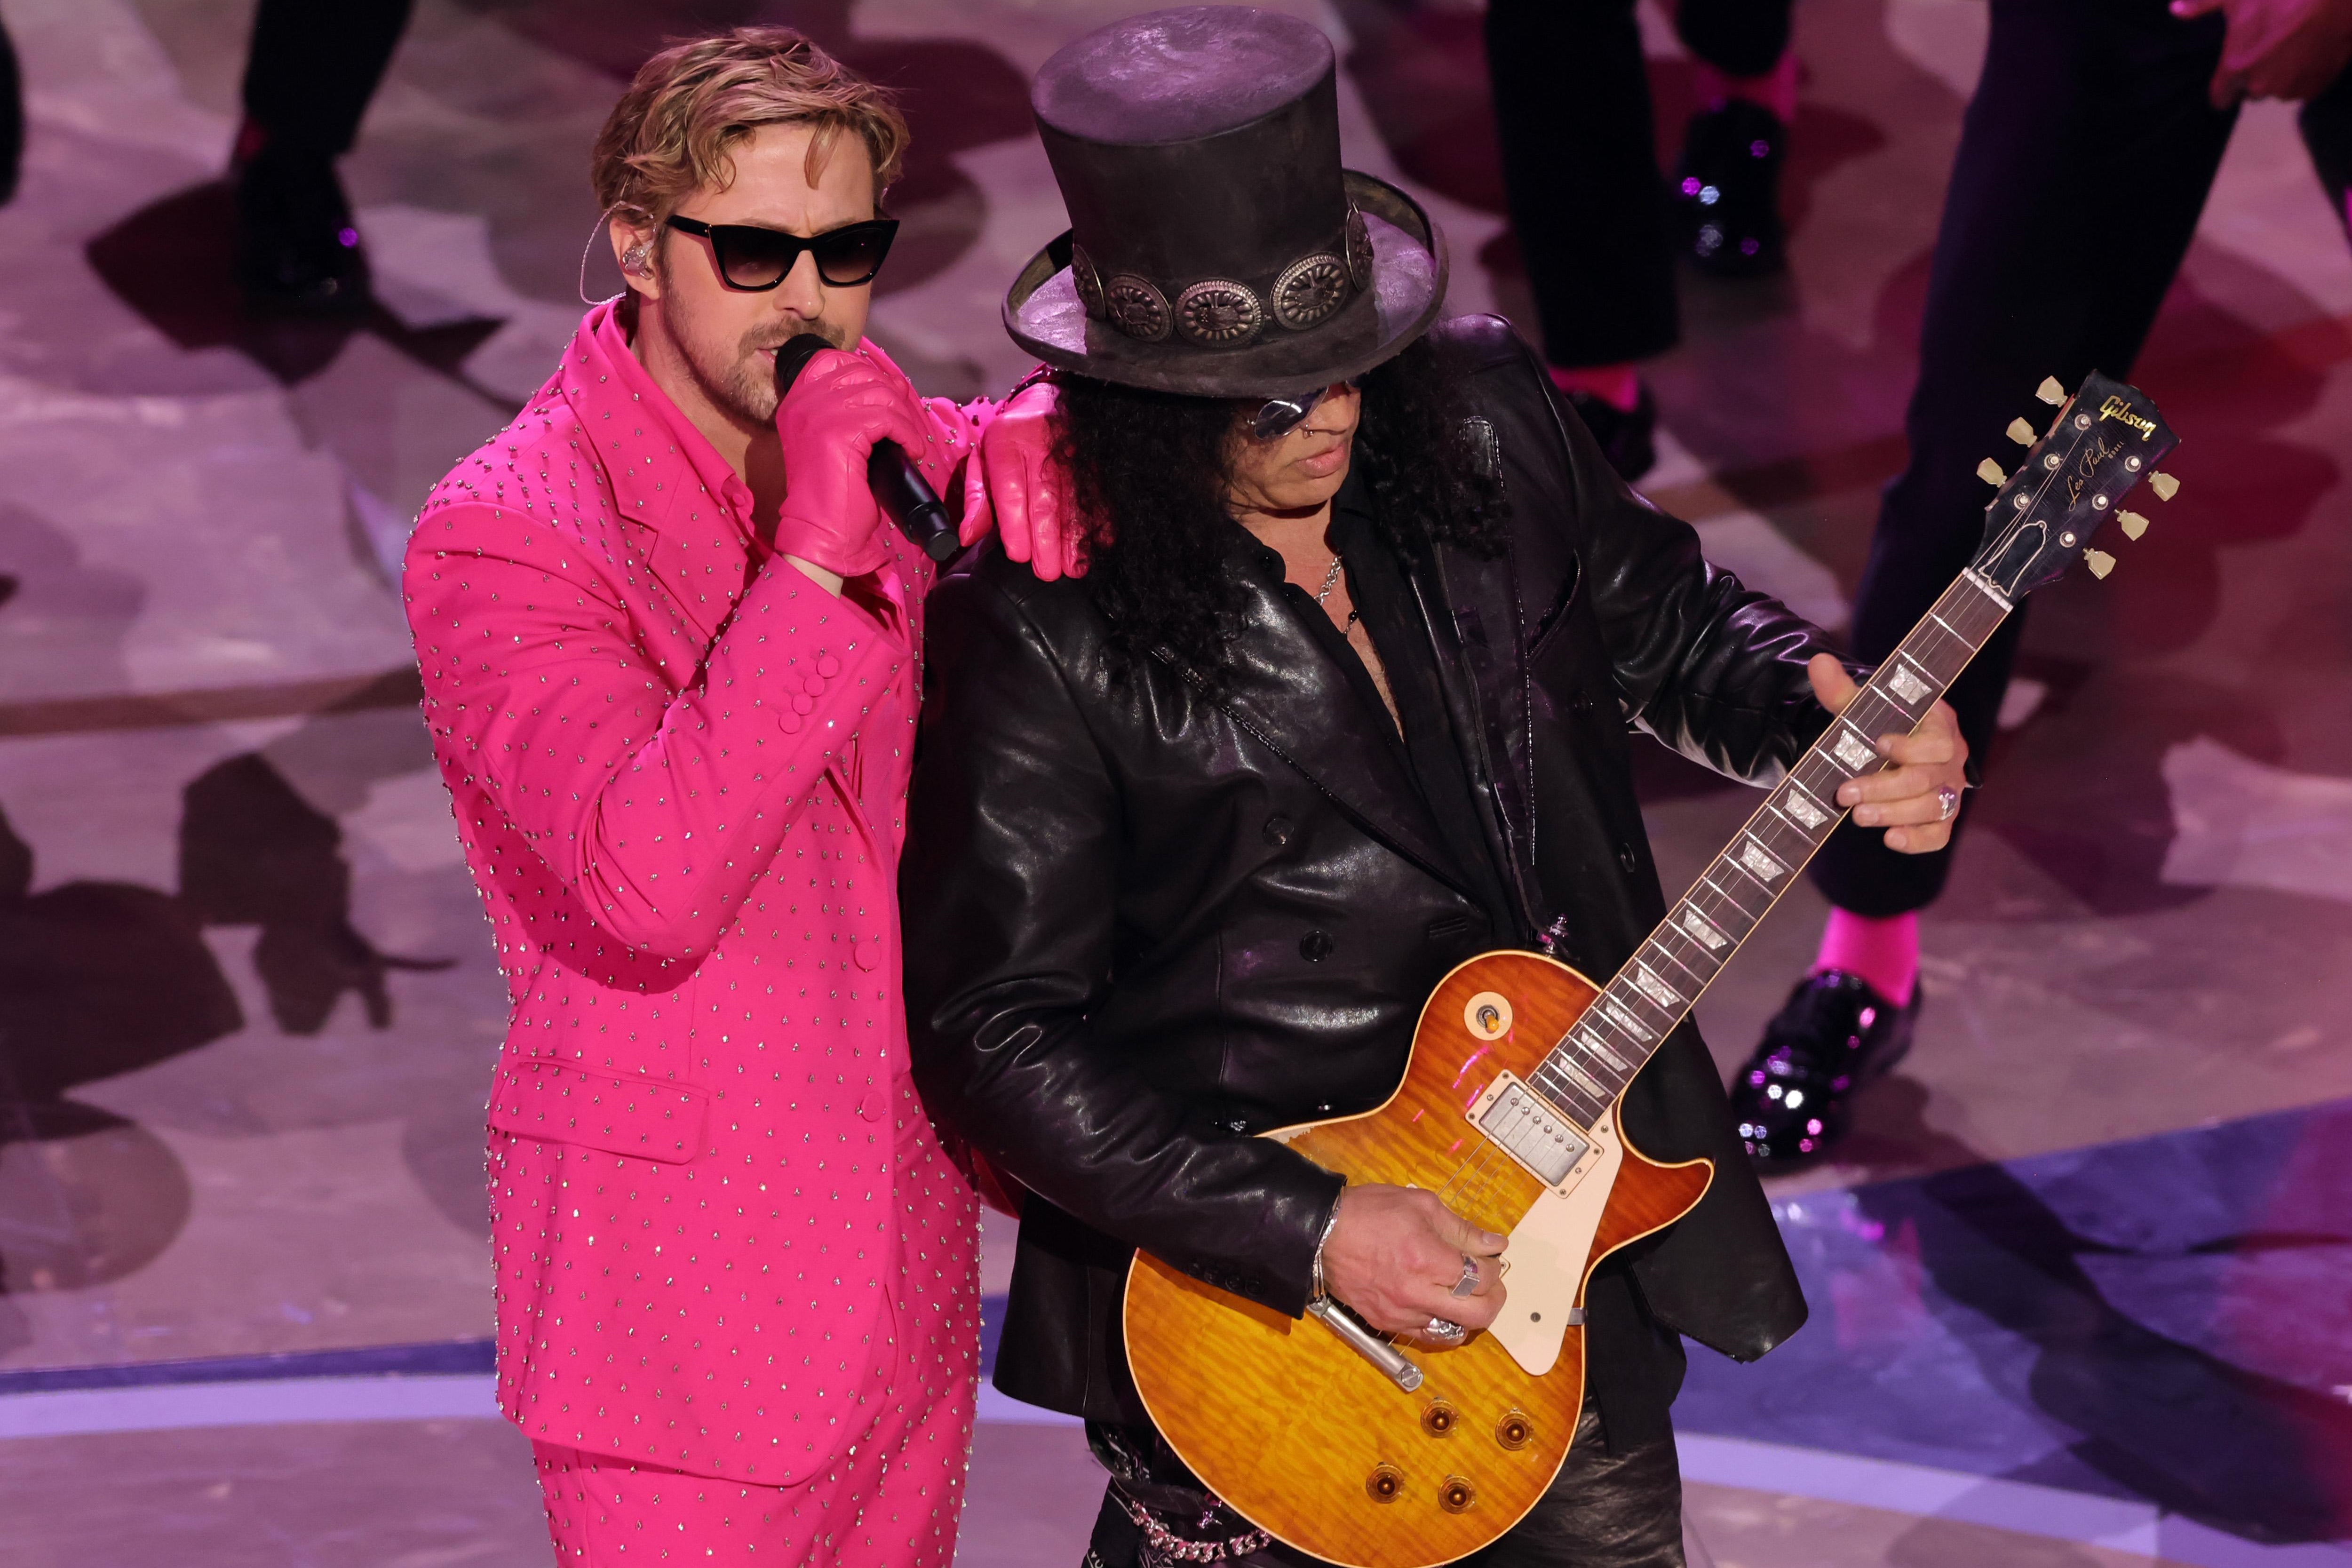 Gosling wears sunglasses, an all-pink suit, and pink gloves. Next to him, Slash wears black leather and his signature top hat, his axe in his hands.